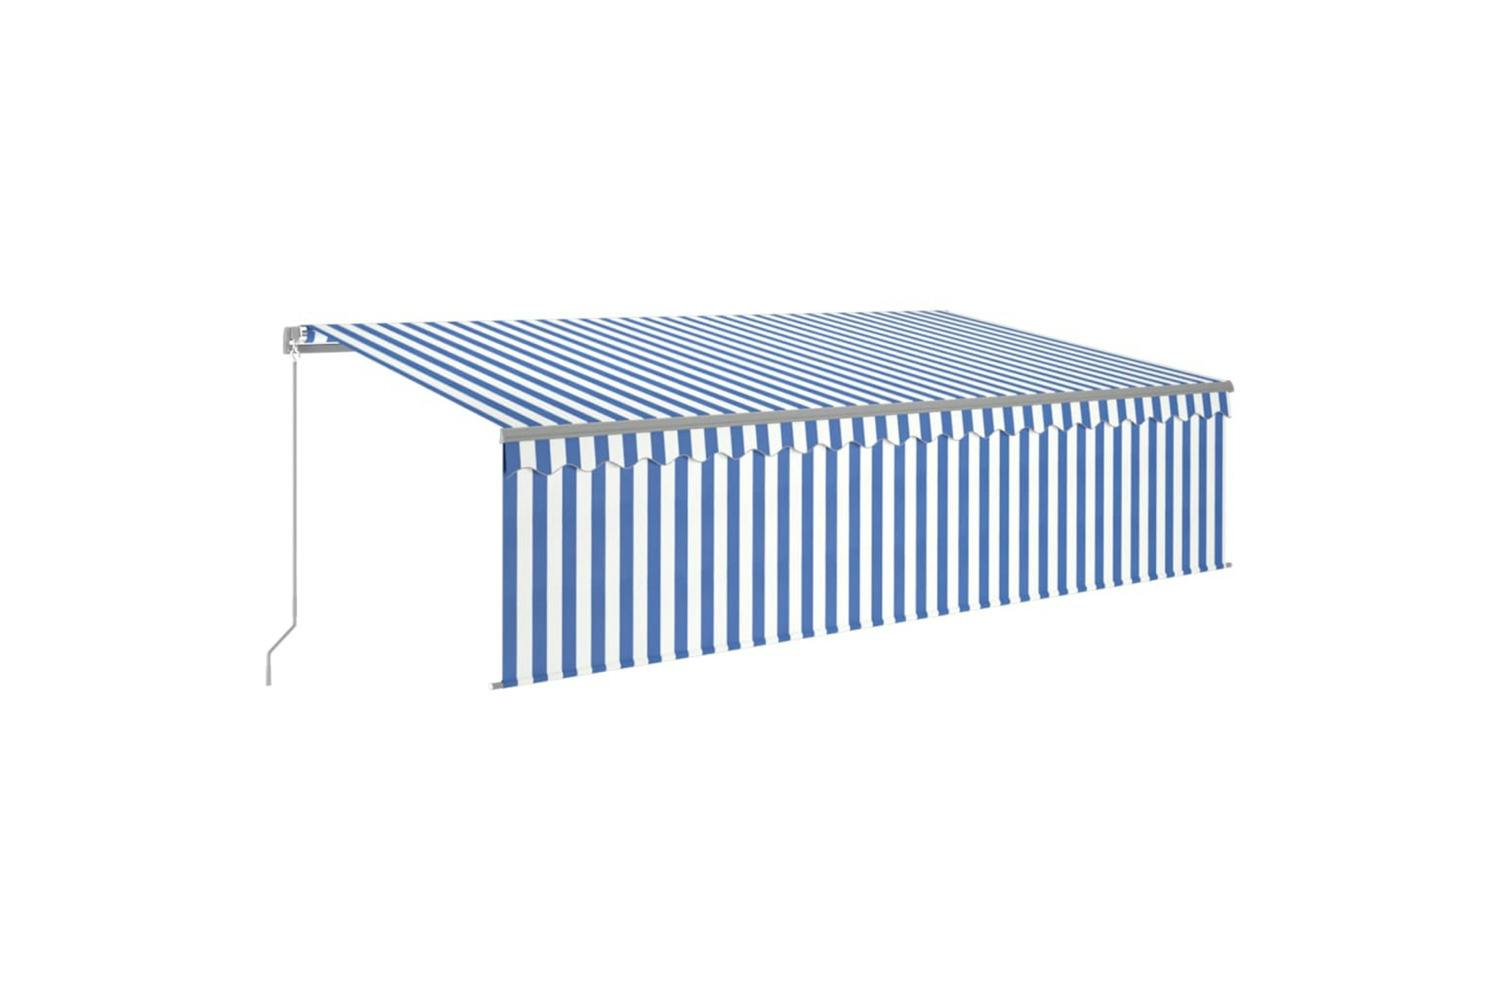 Vidaxl 3069456 Manual Retractable Awning With Blind 5x3m Blue&white